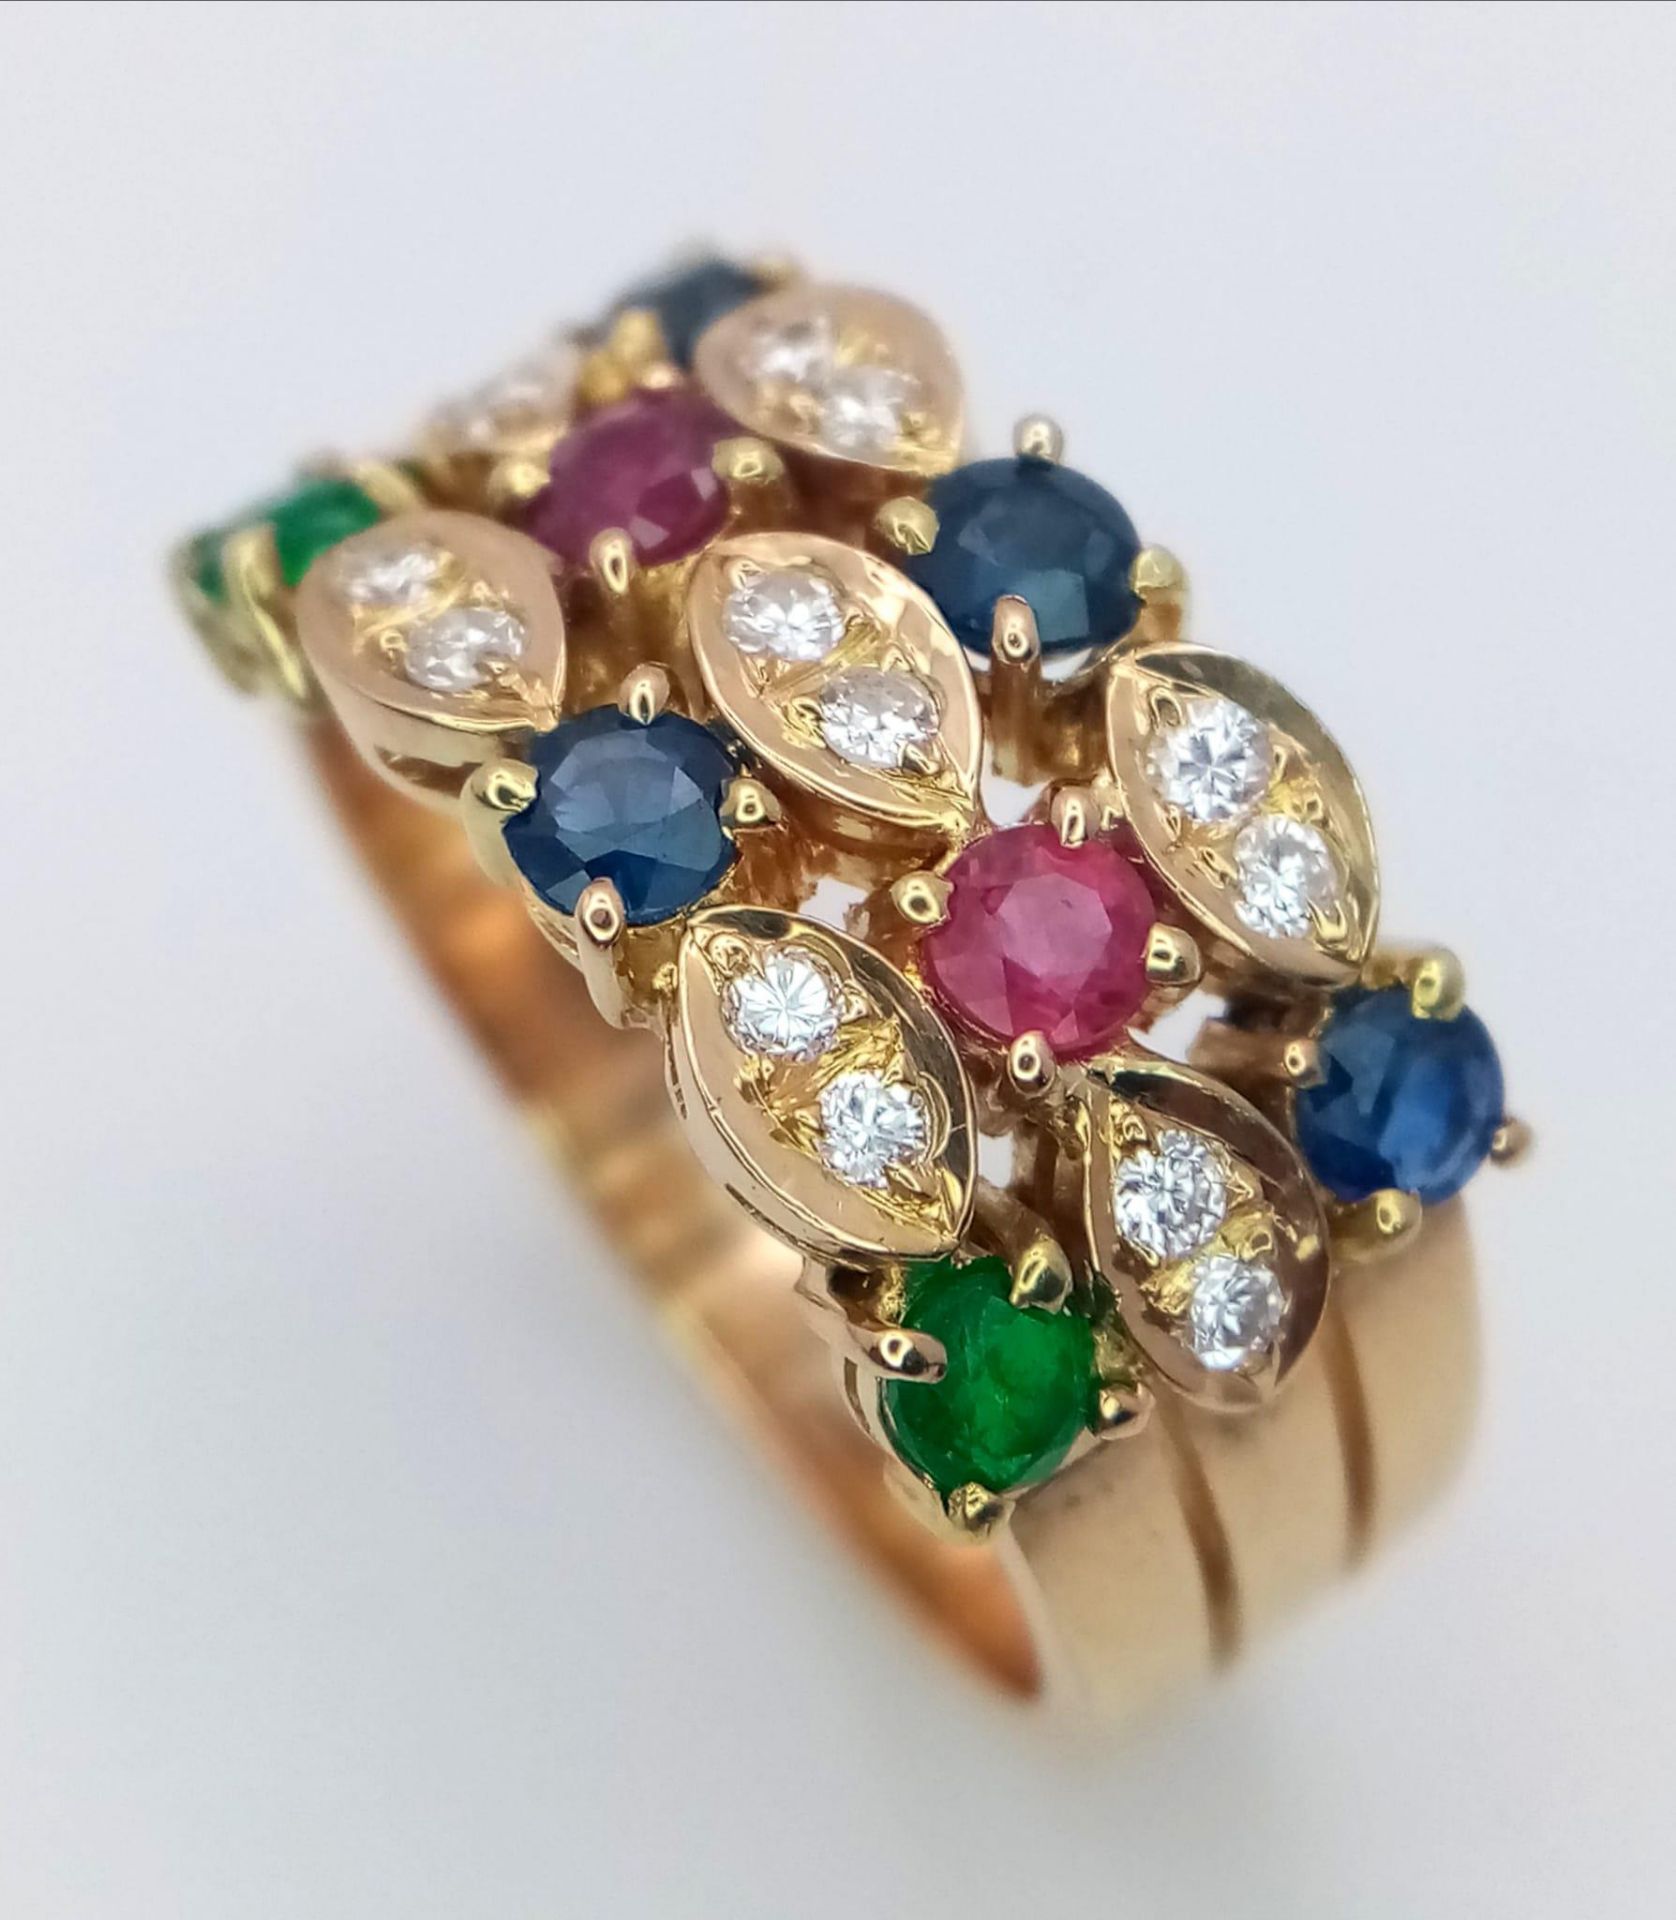 A 18K YELLOW GOLD DIAMOND, RUBY, SAPPHIRE & EMERALD SET RING 7.3G SIZE N 1/2 ref: 6441 - Image 3 of 5